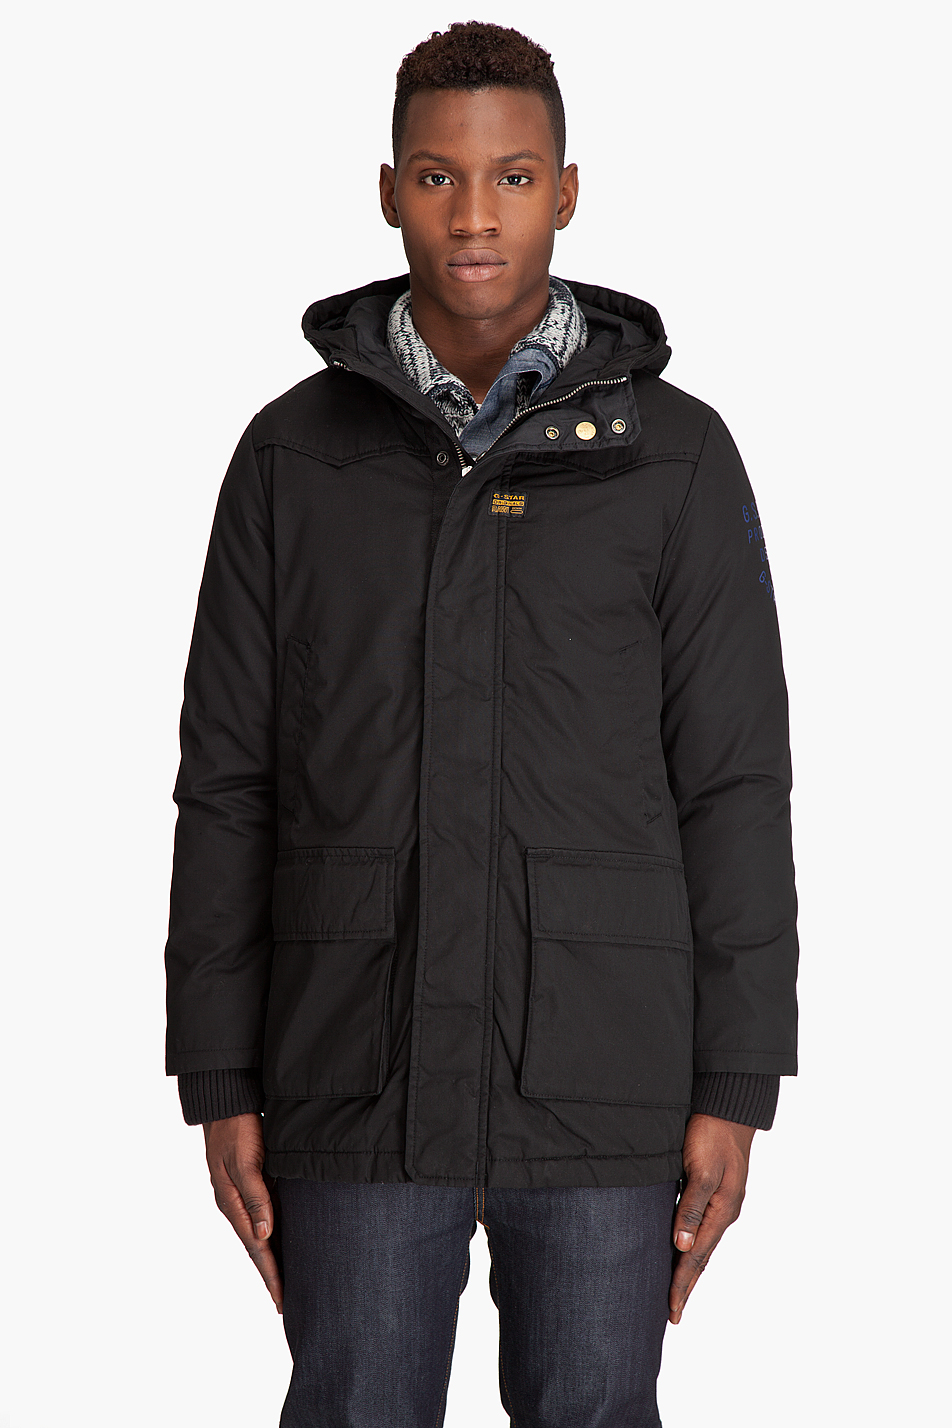 Lyst - G-Star Raw New Colorado Hooded Parka in Black for Men